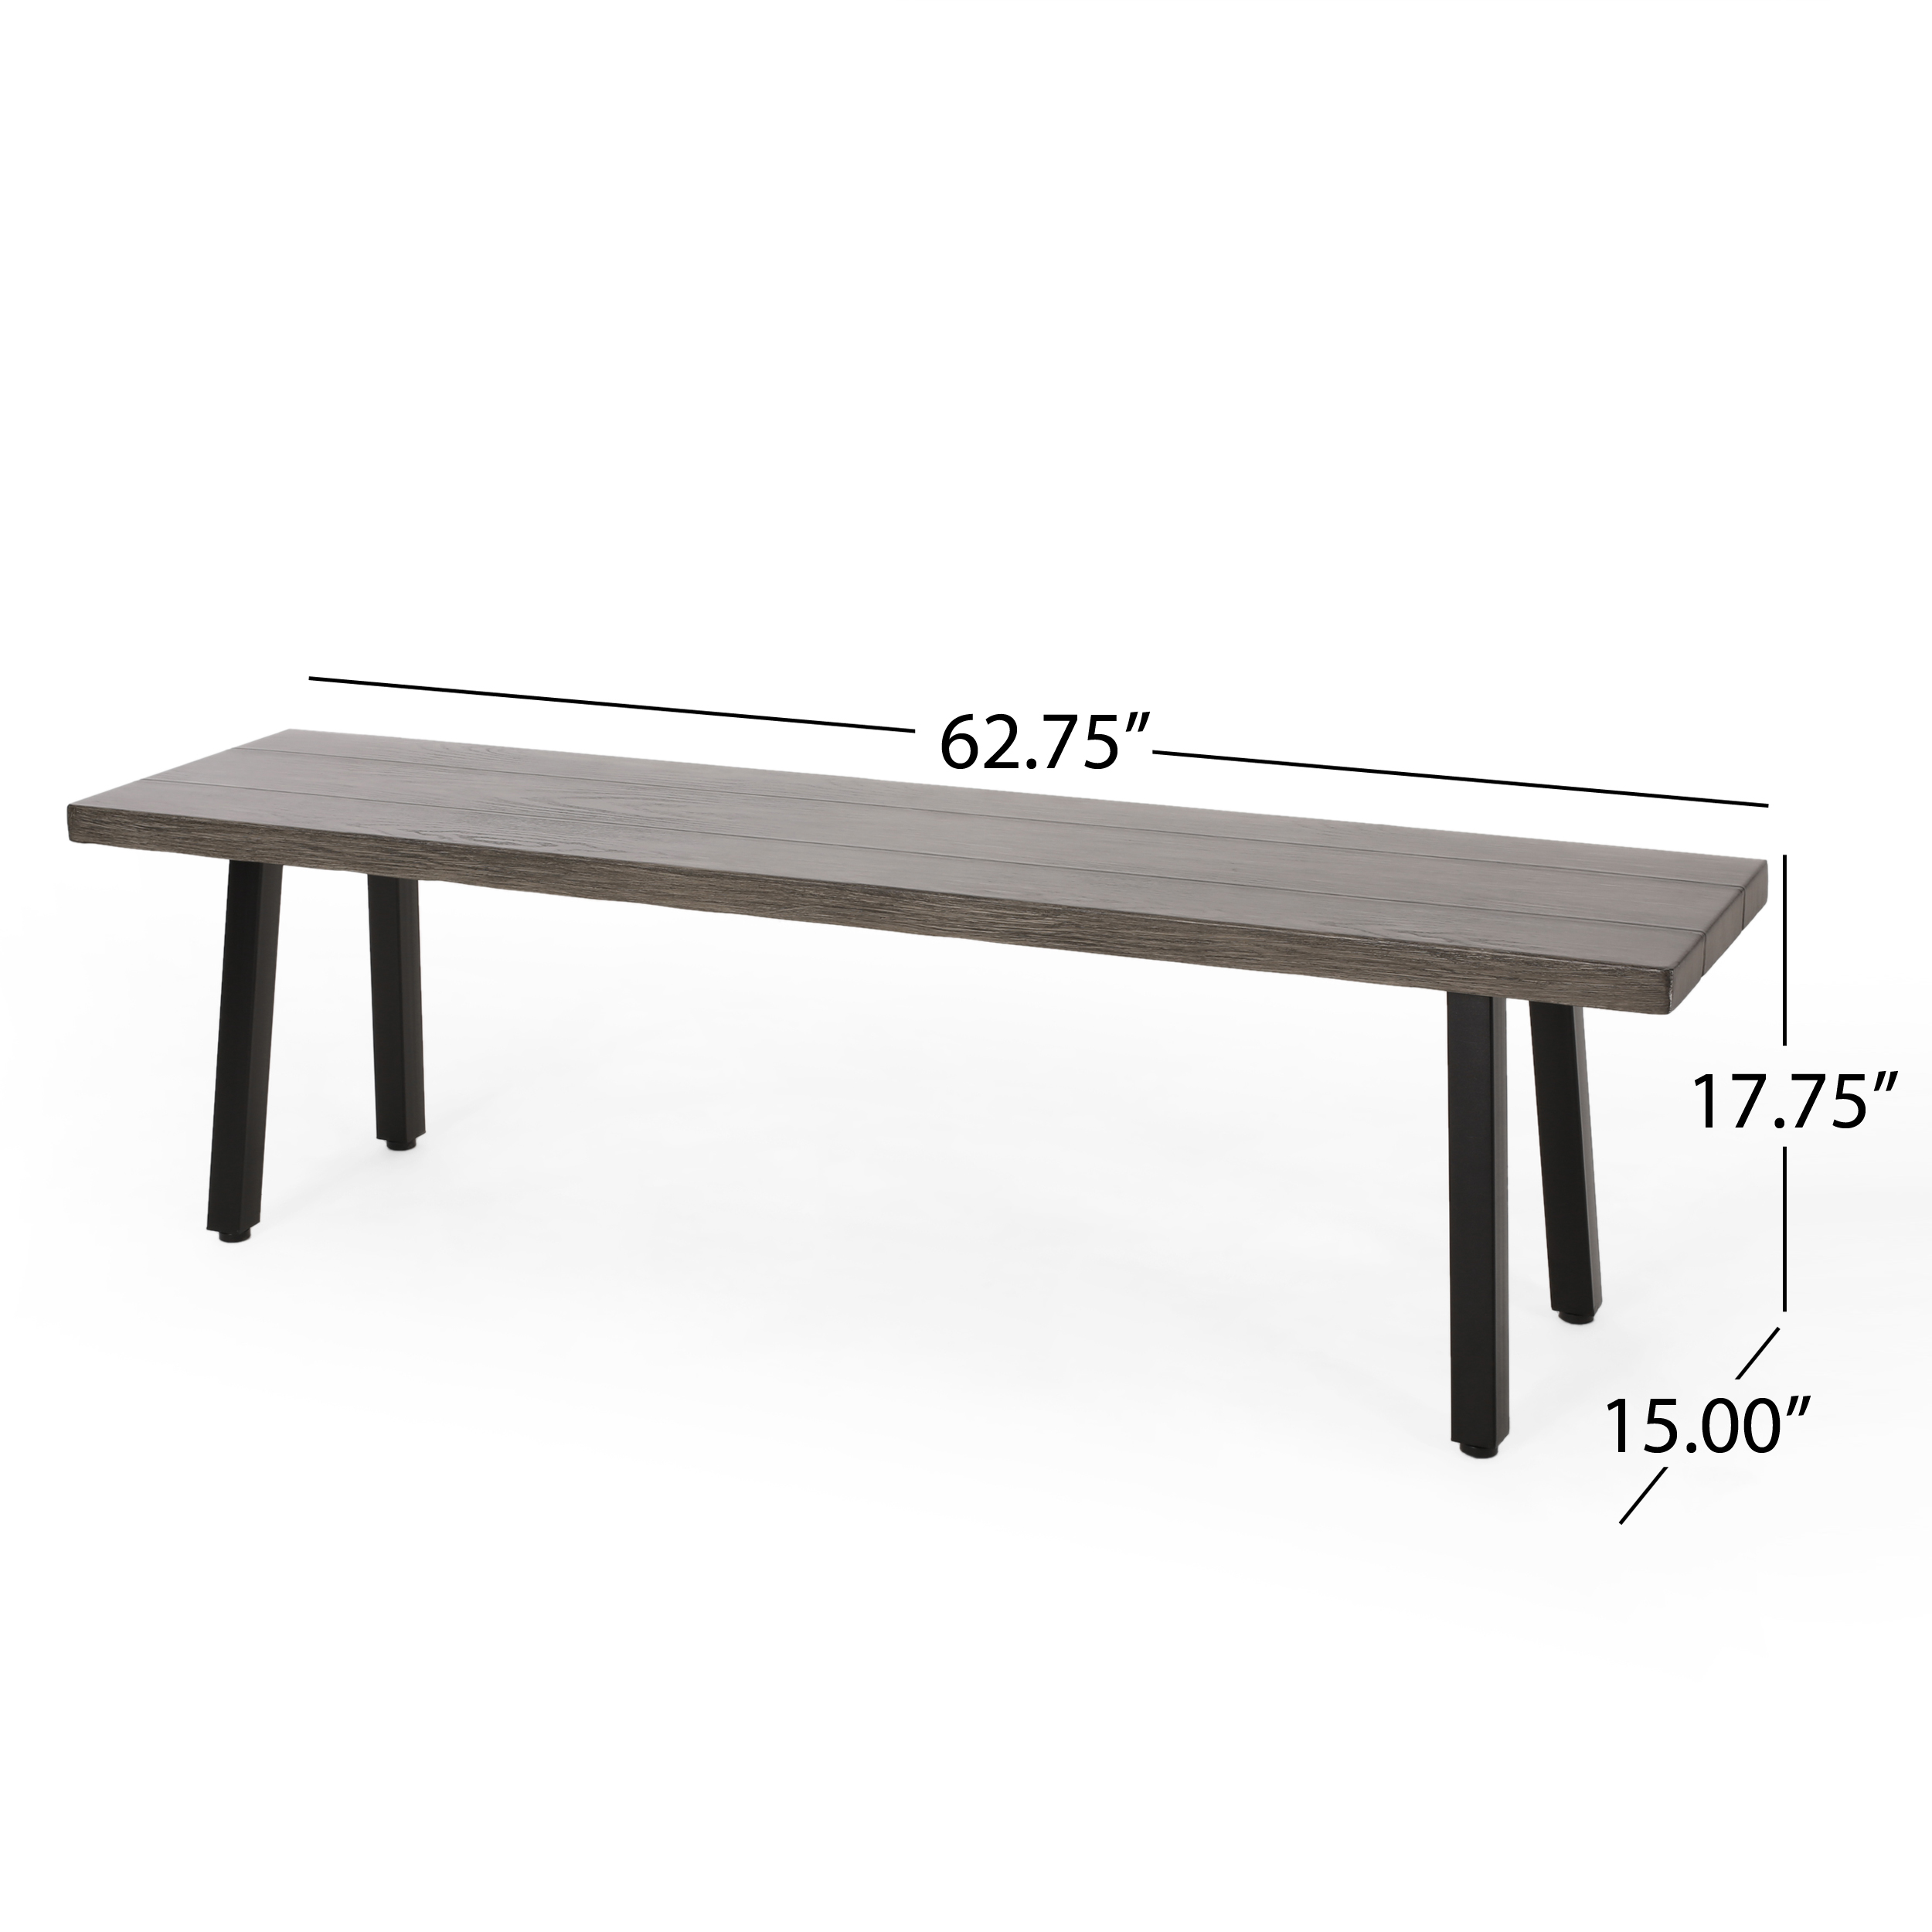 GDF Studio Altair Outdoor Modern Industrial 3 Piece Aluminum Dining Set with Benches, Gray and Matte Black - image 4 of 13